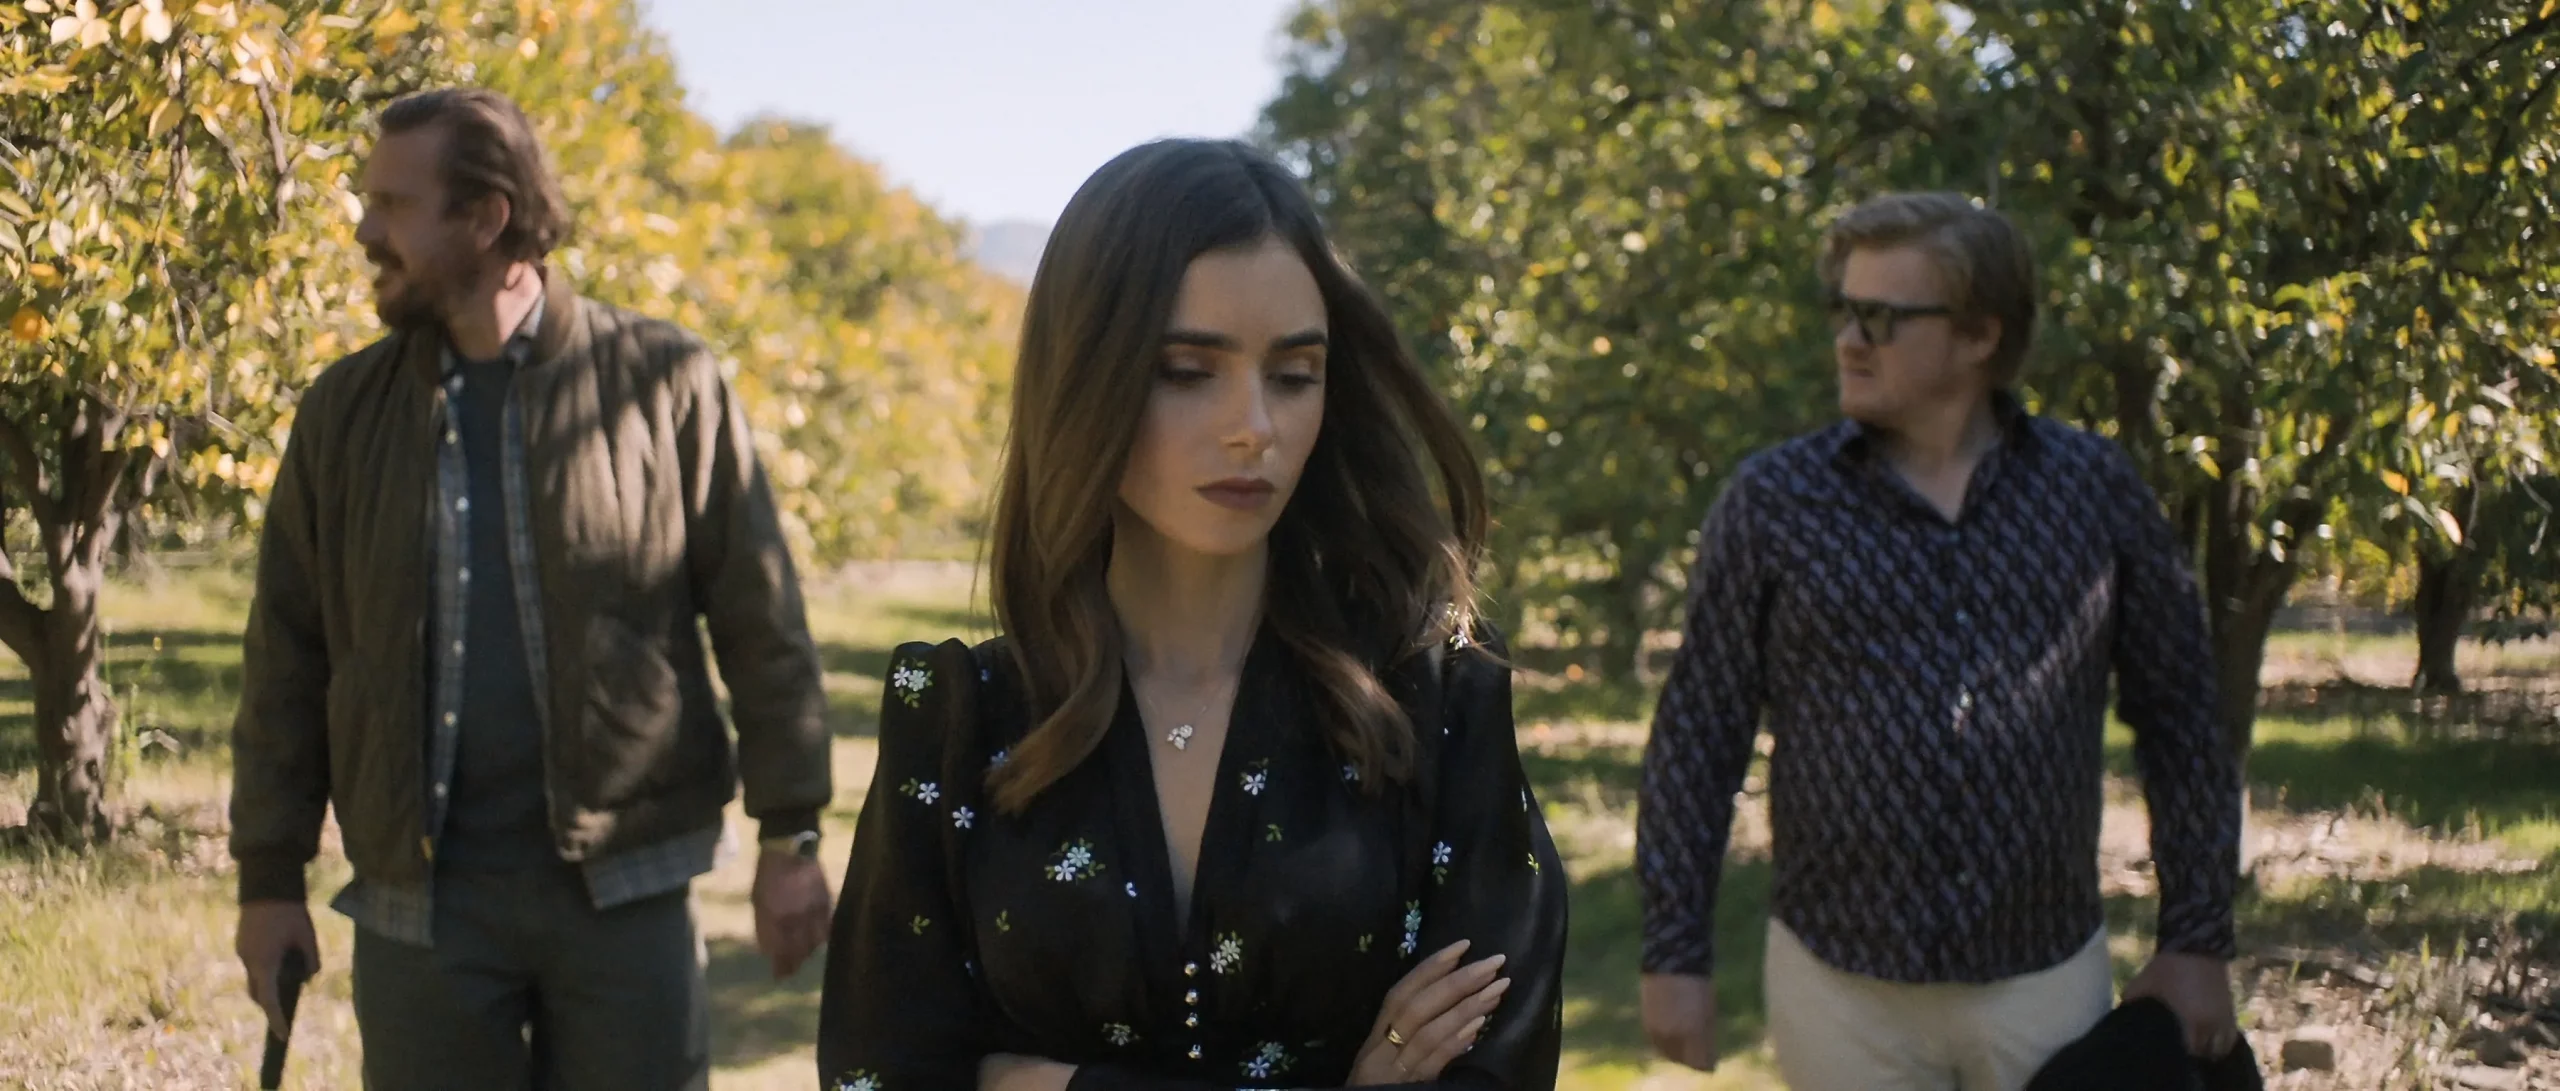 ‘Windfall’ on Netflix: Lily Collins Is All Praises for Her Director Husband, Charlie McDowell, “He’s such an actor’s director.”